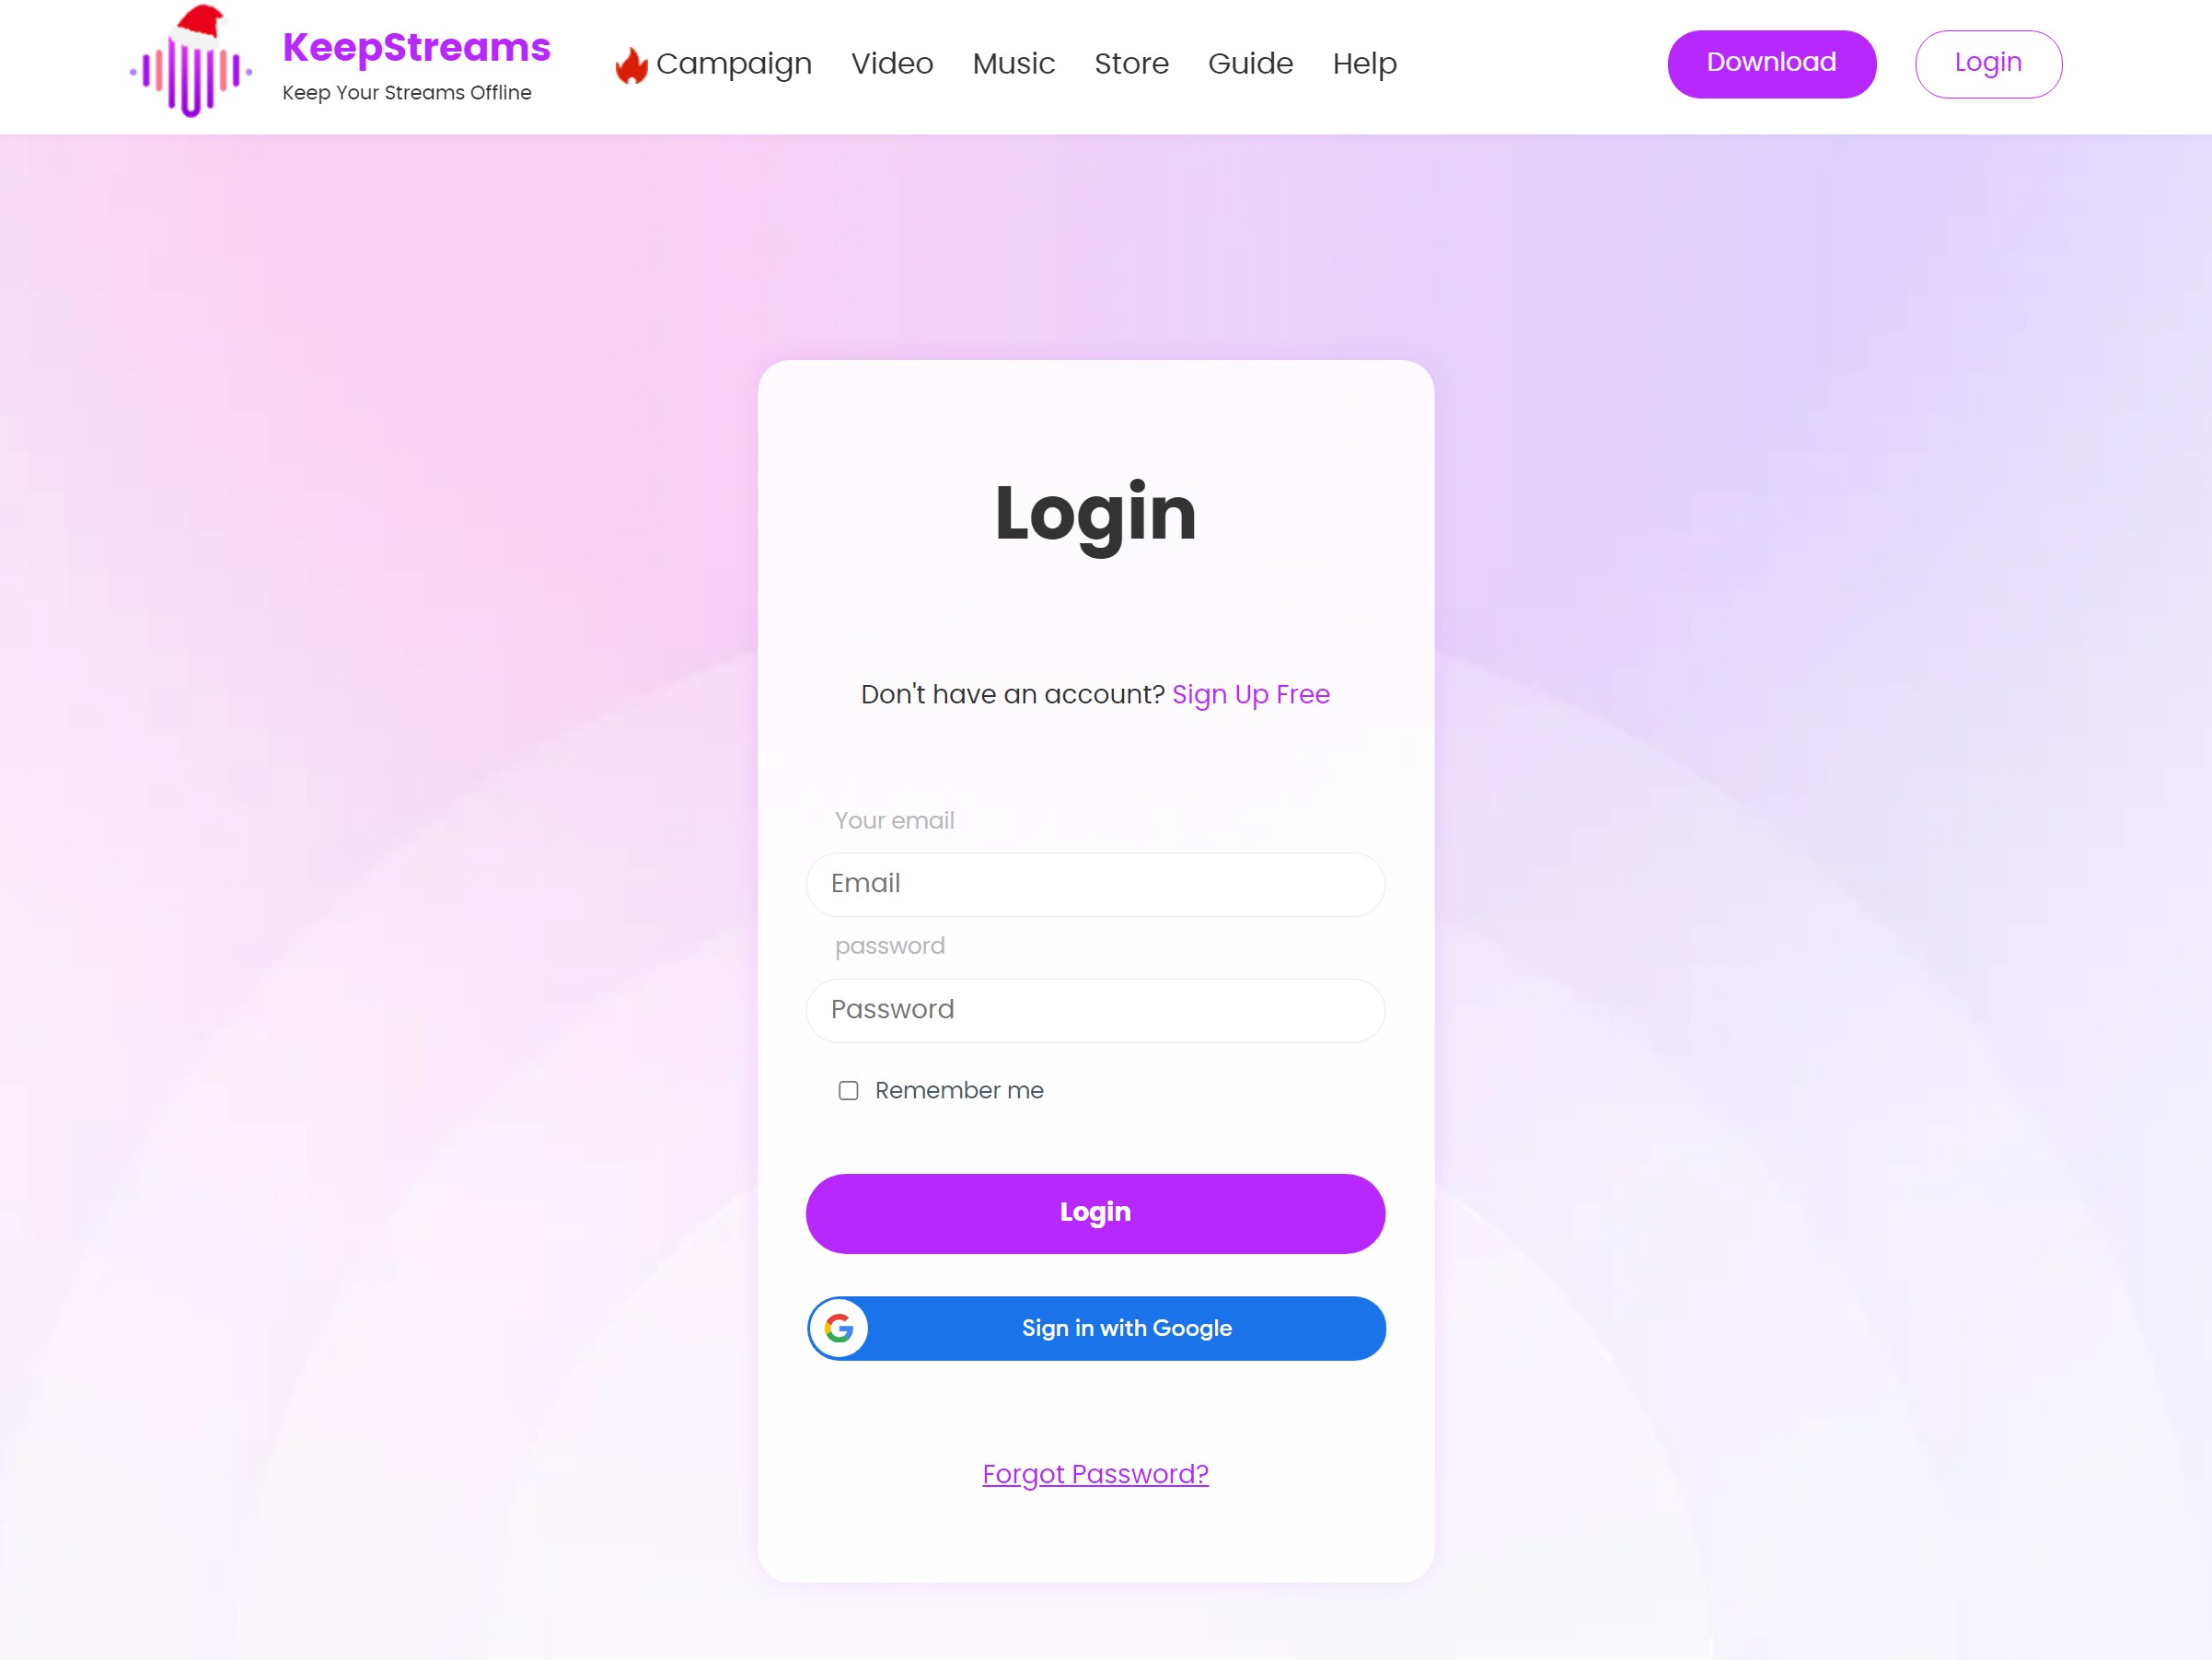 Log into your KeepStreams account